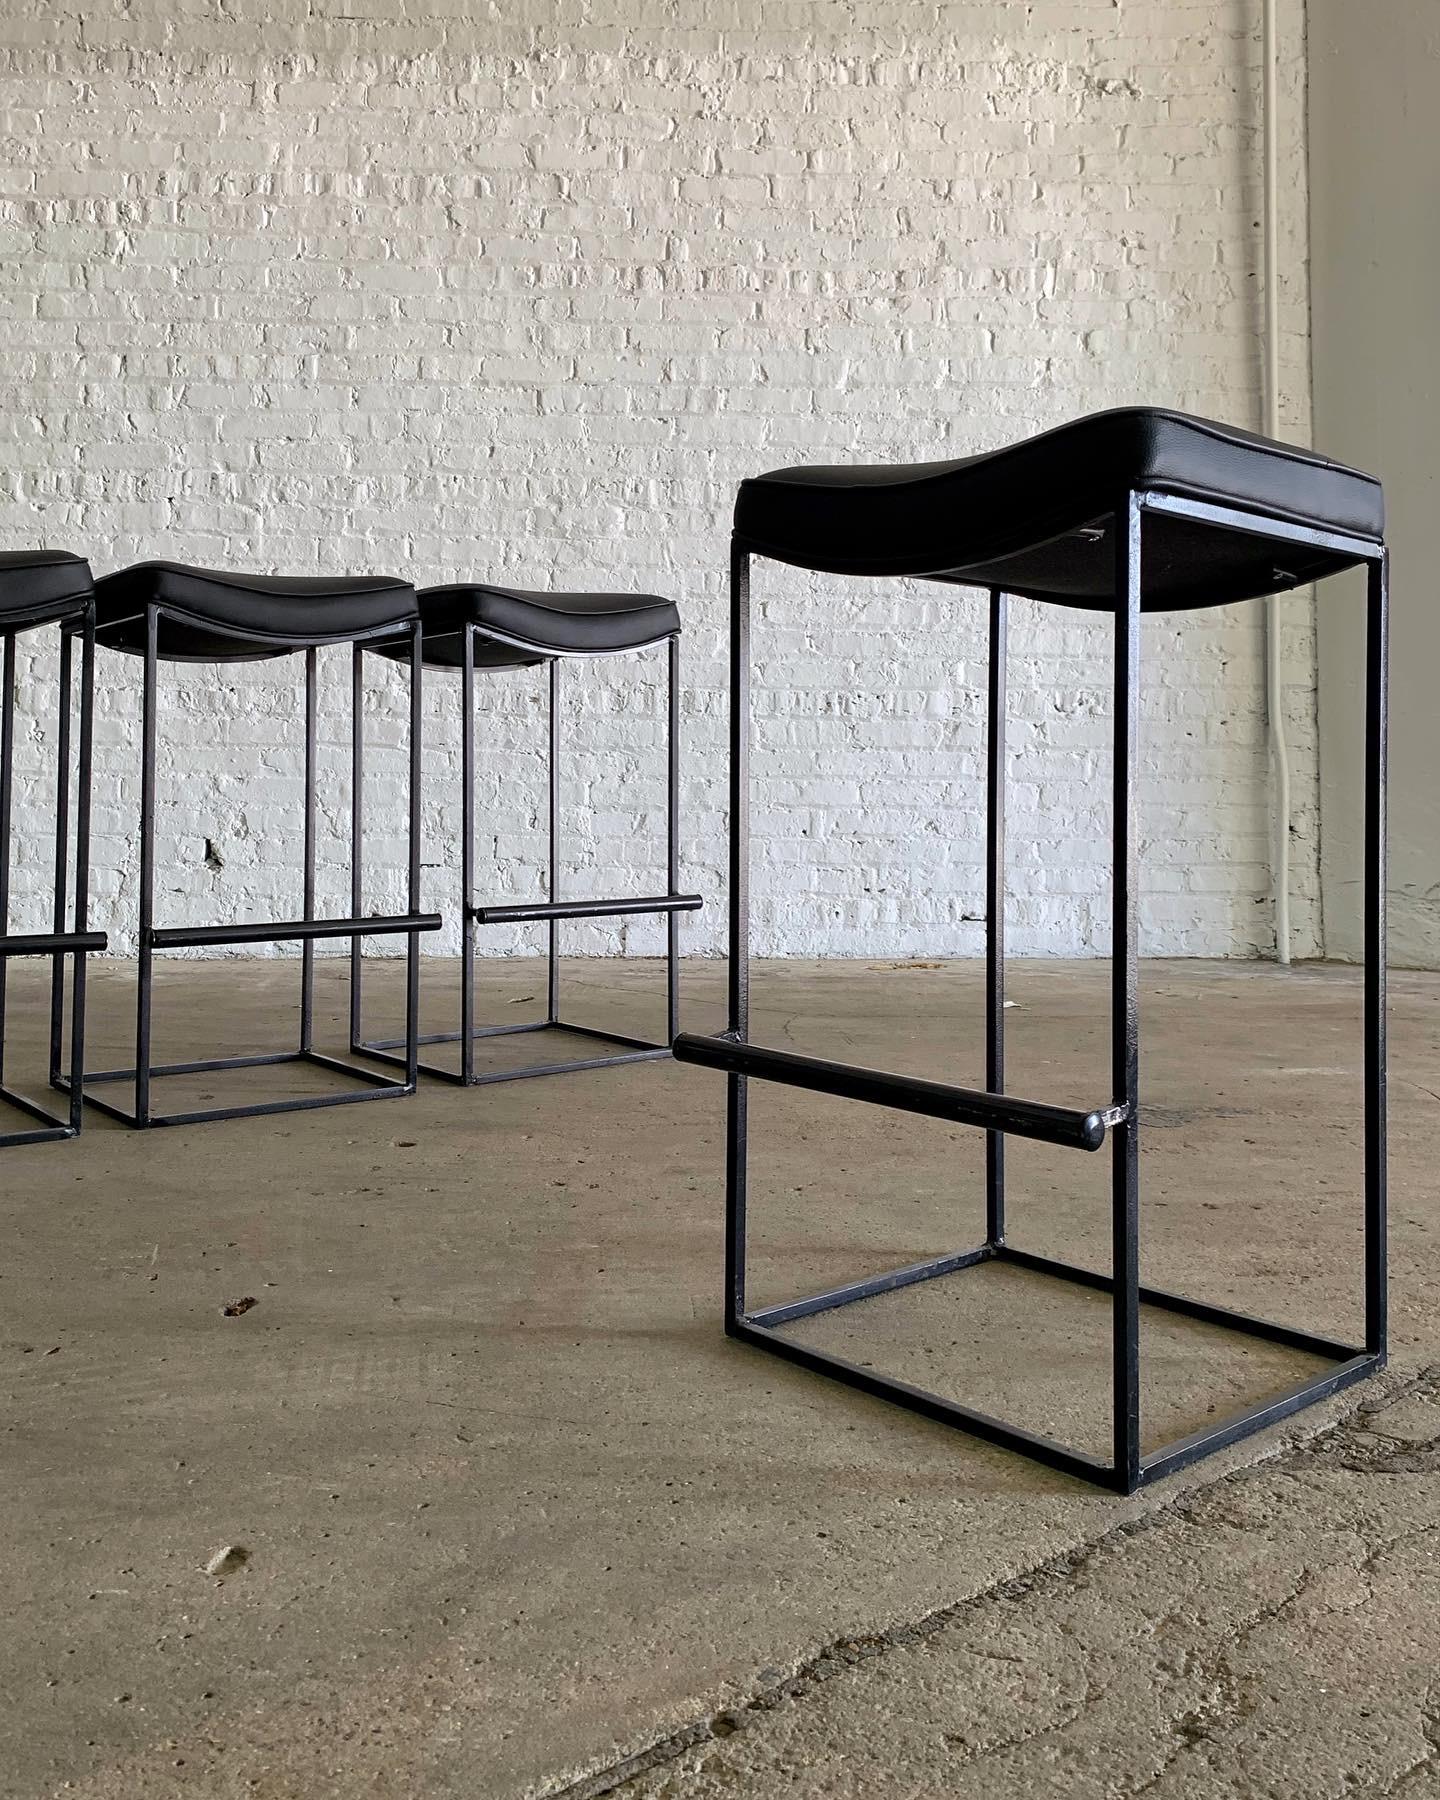 Rare and strikingly modern set of bar stools designed by Arthur Umanoff for Shaver Howard, c.1975

Mid-century modern icon and master of iron, American designer Arthur Umanoff brings a more sleek and modern idea to the table with these bar stools.